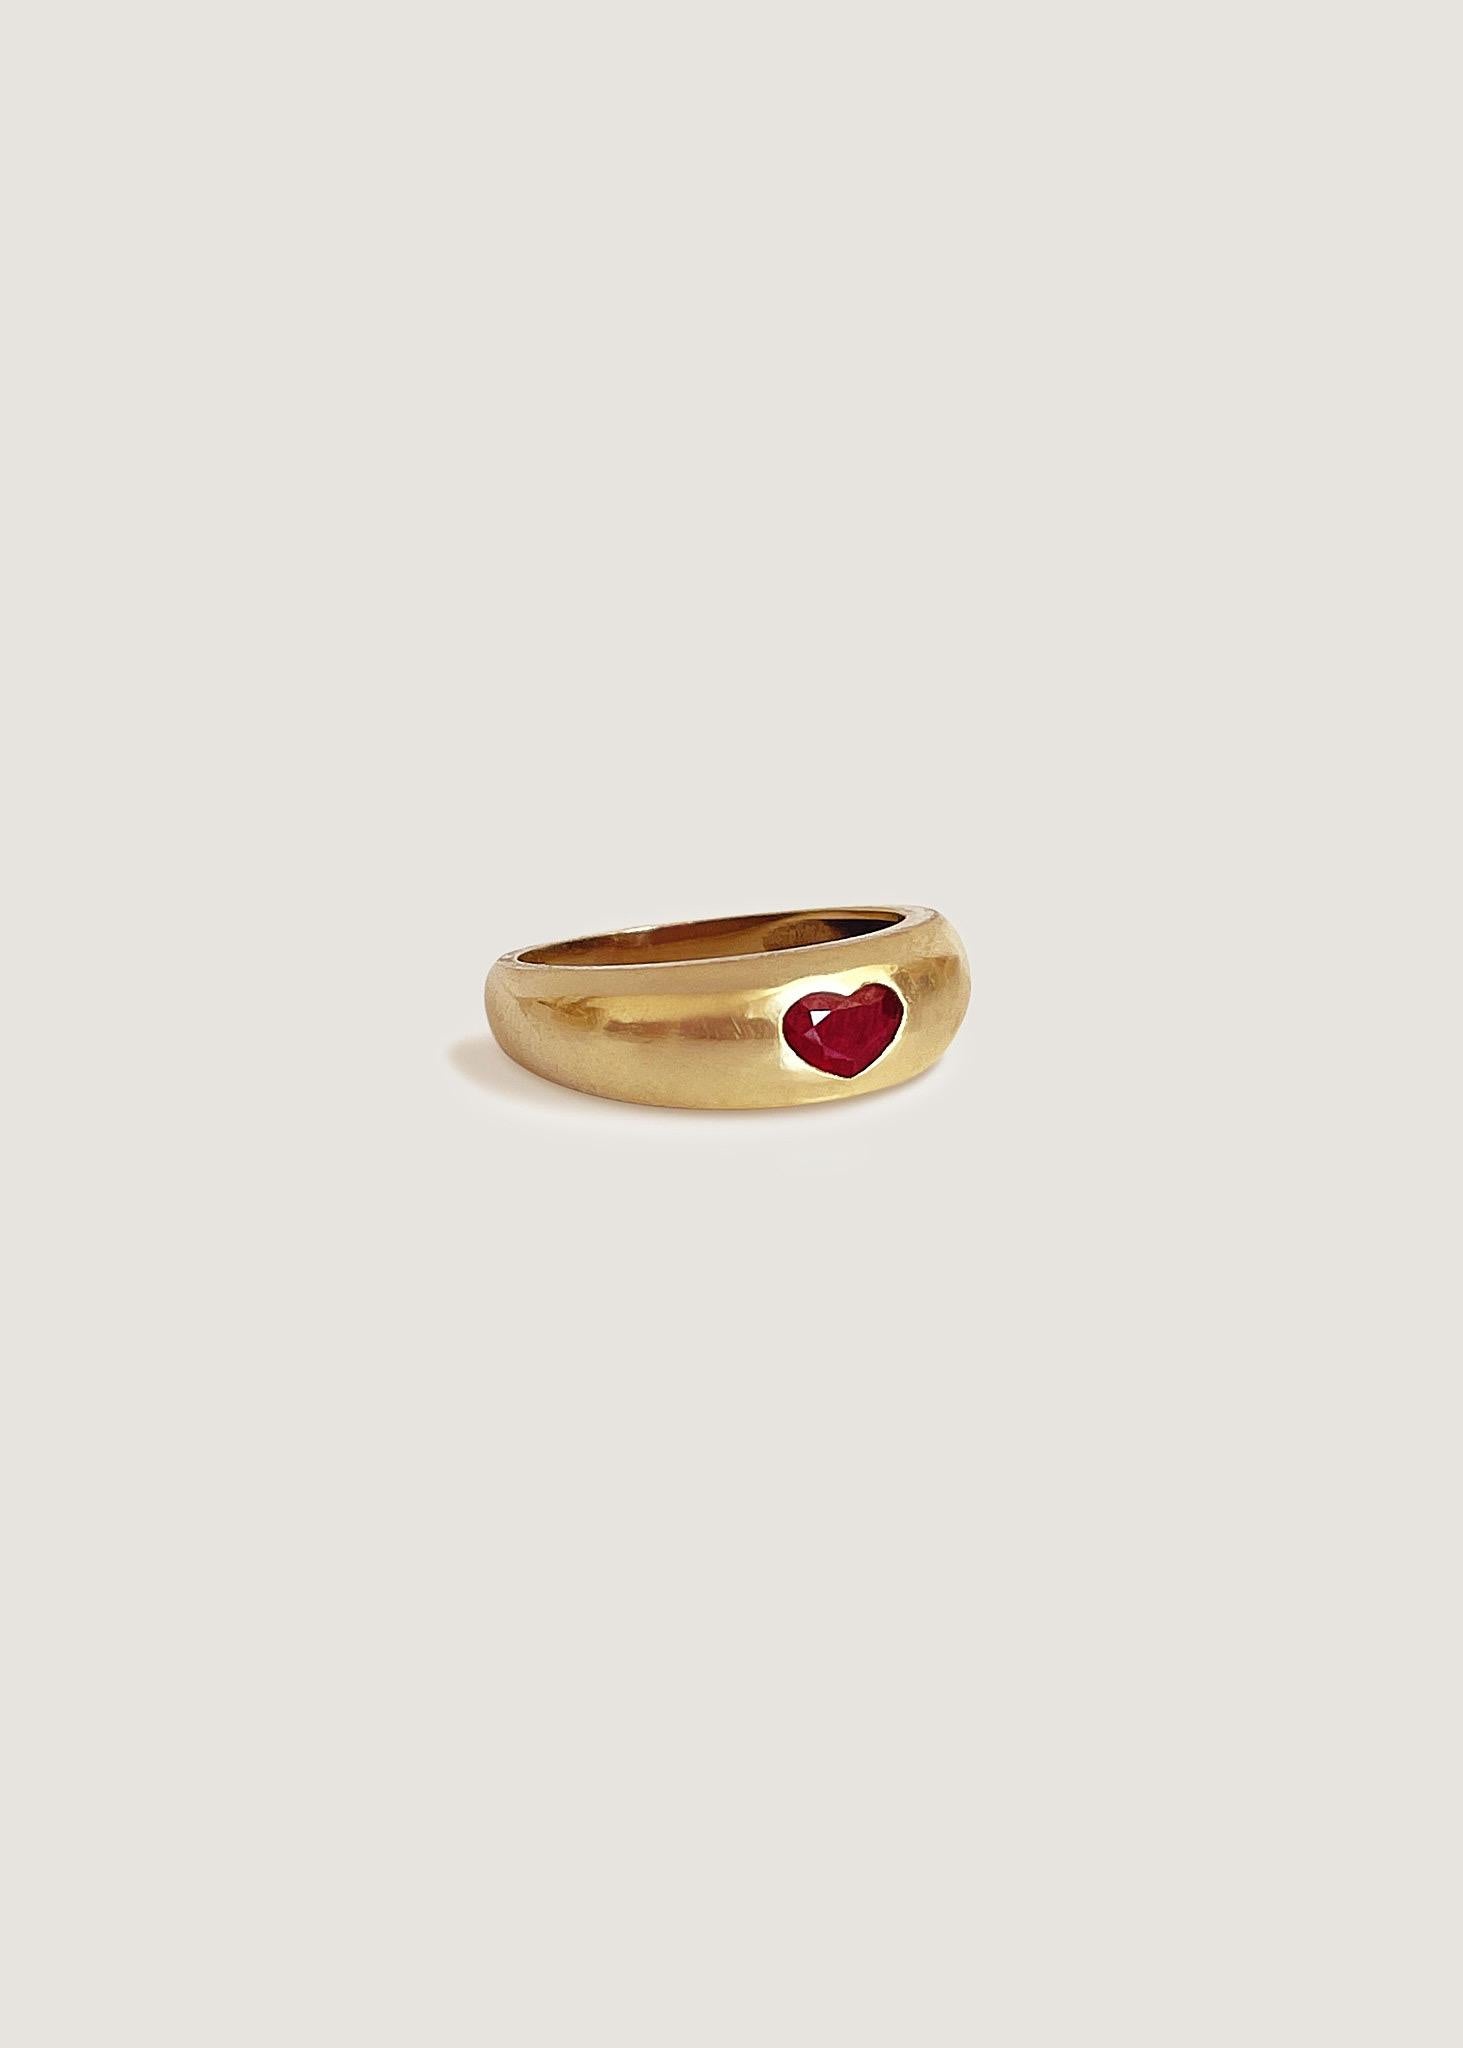 For Sale:  Baby Kay Heart Dome Ring .50CW 14k Solid Yellow Gold 3